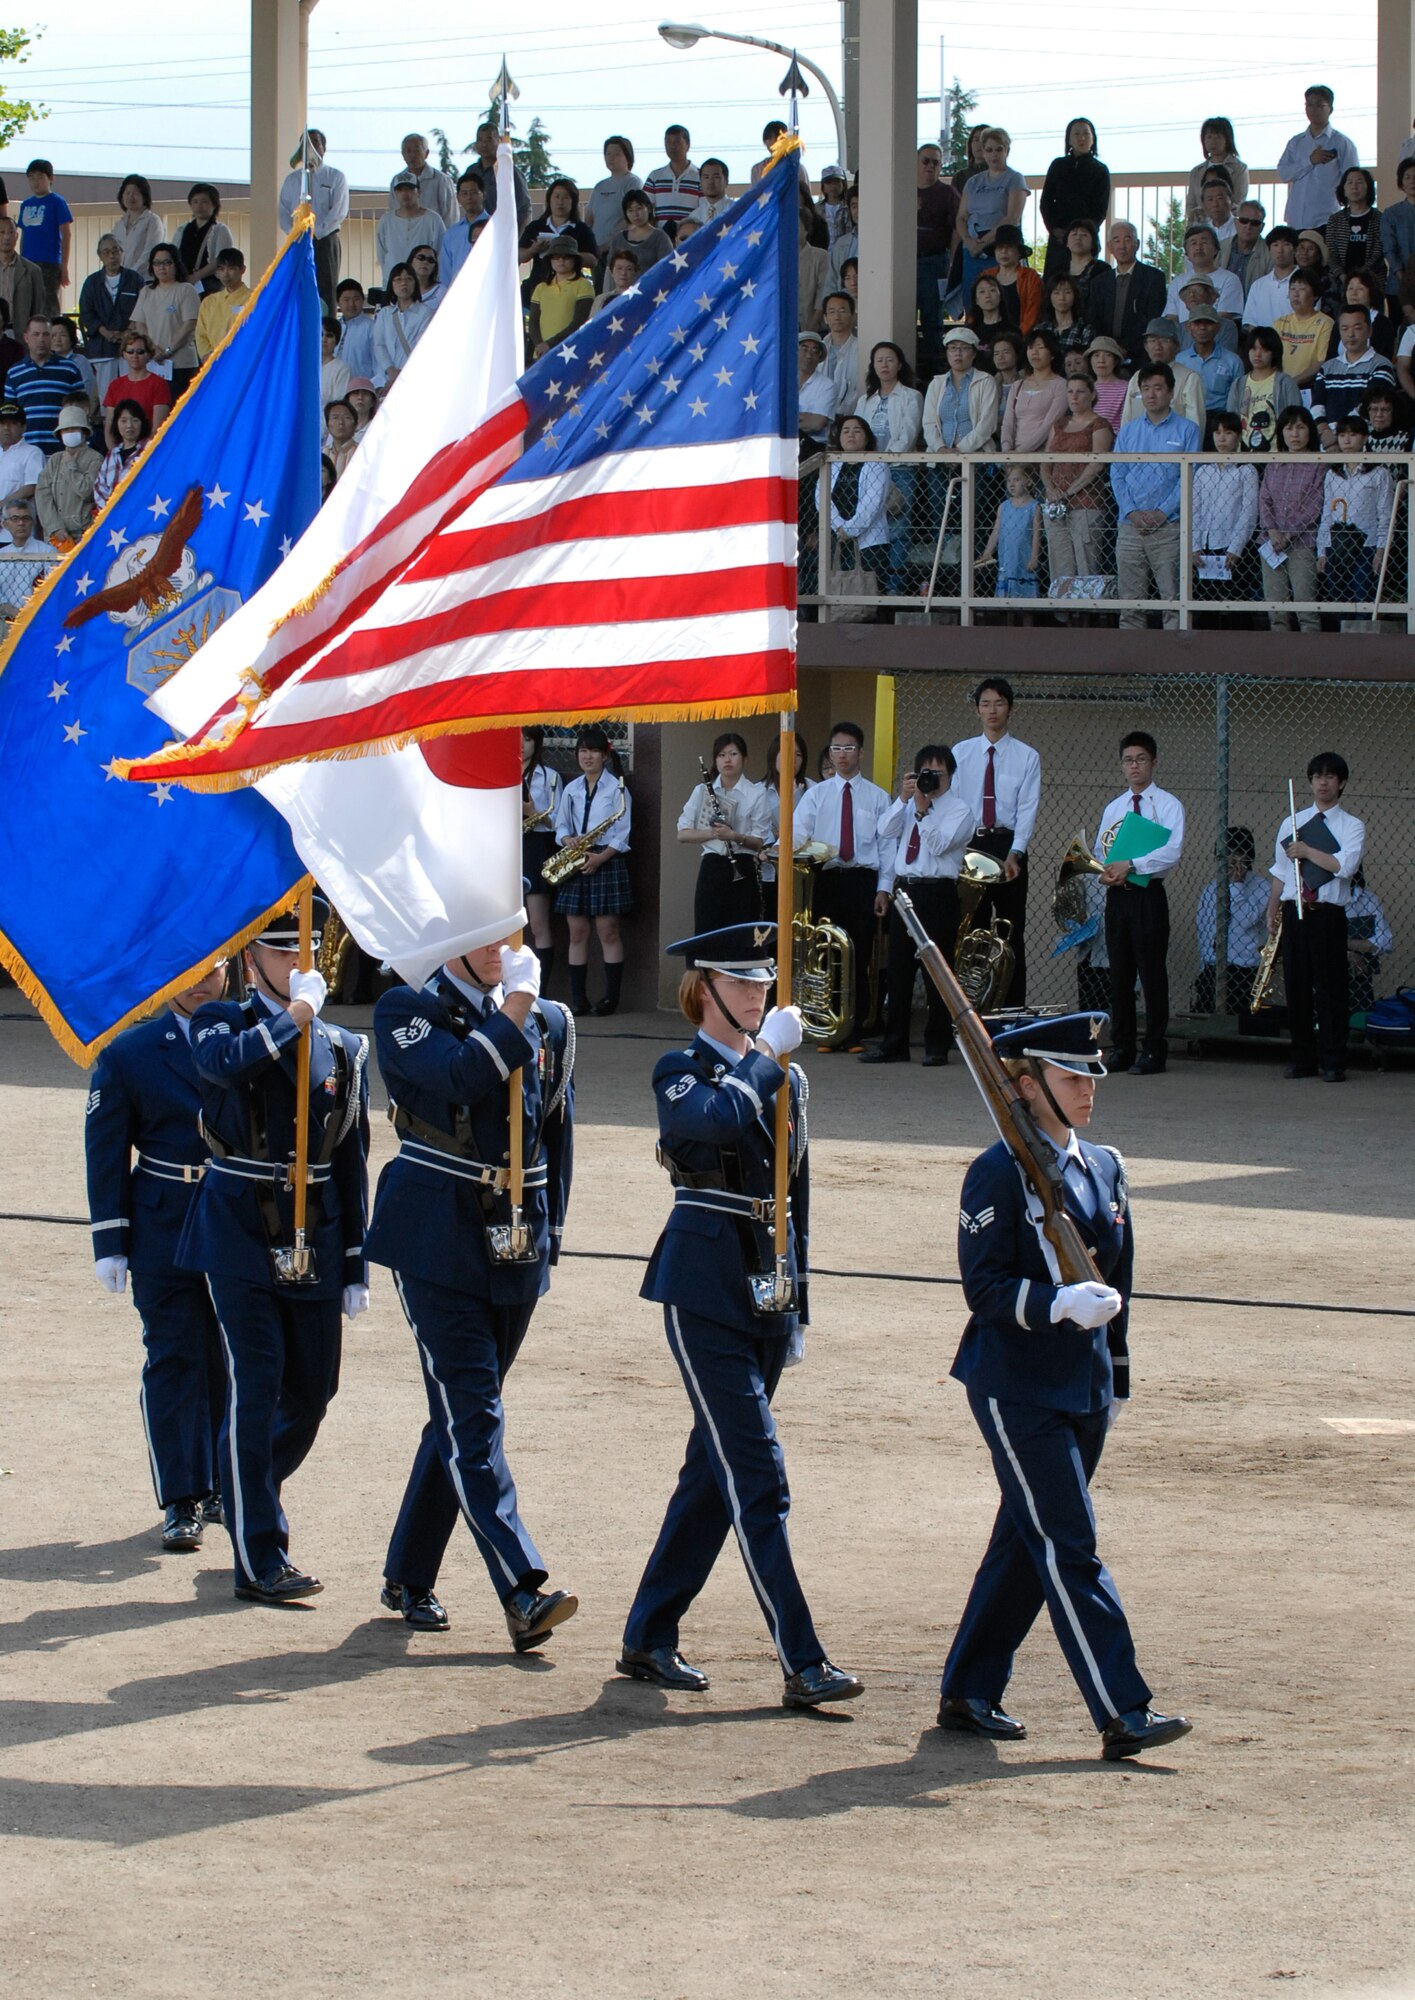 Members of Yokota's Honor Guard March the Flags on to the field during the PACAF Band's Sayonara concert. PACAF Band will be reduced to 11 members due to realignments within the Air Force. (Photo by Master Sgt. Nelson James VIRIN 070520-F-8509J-017